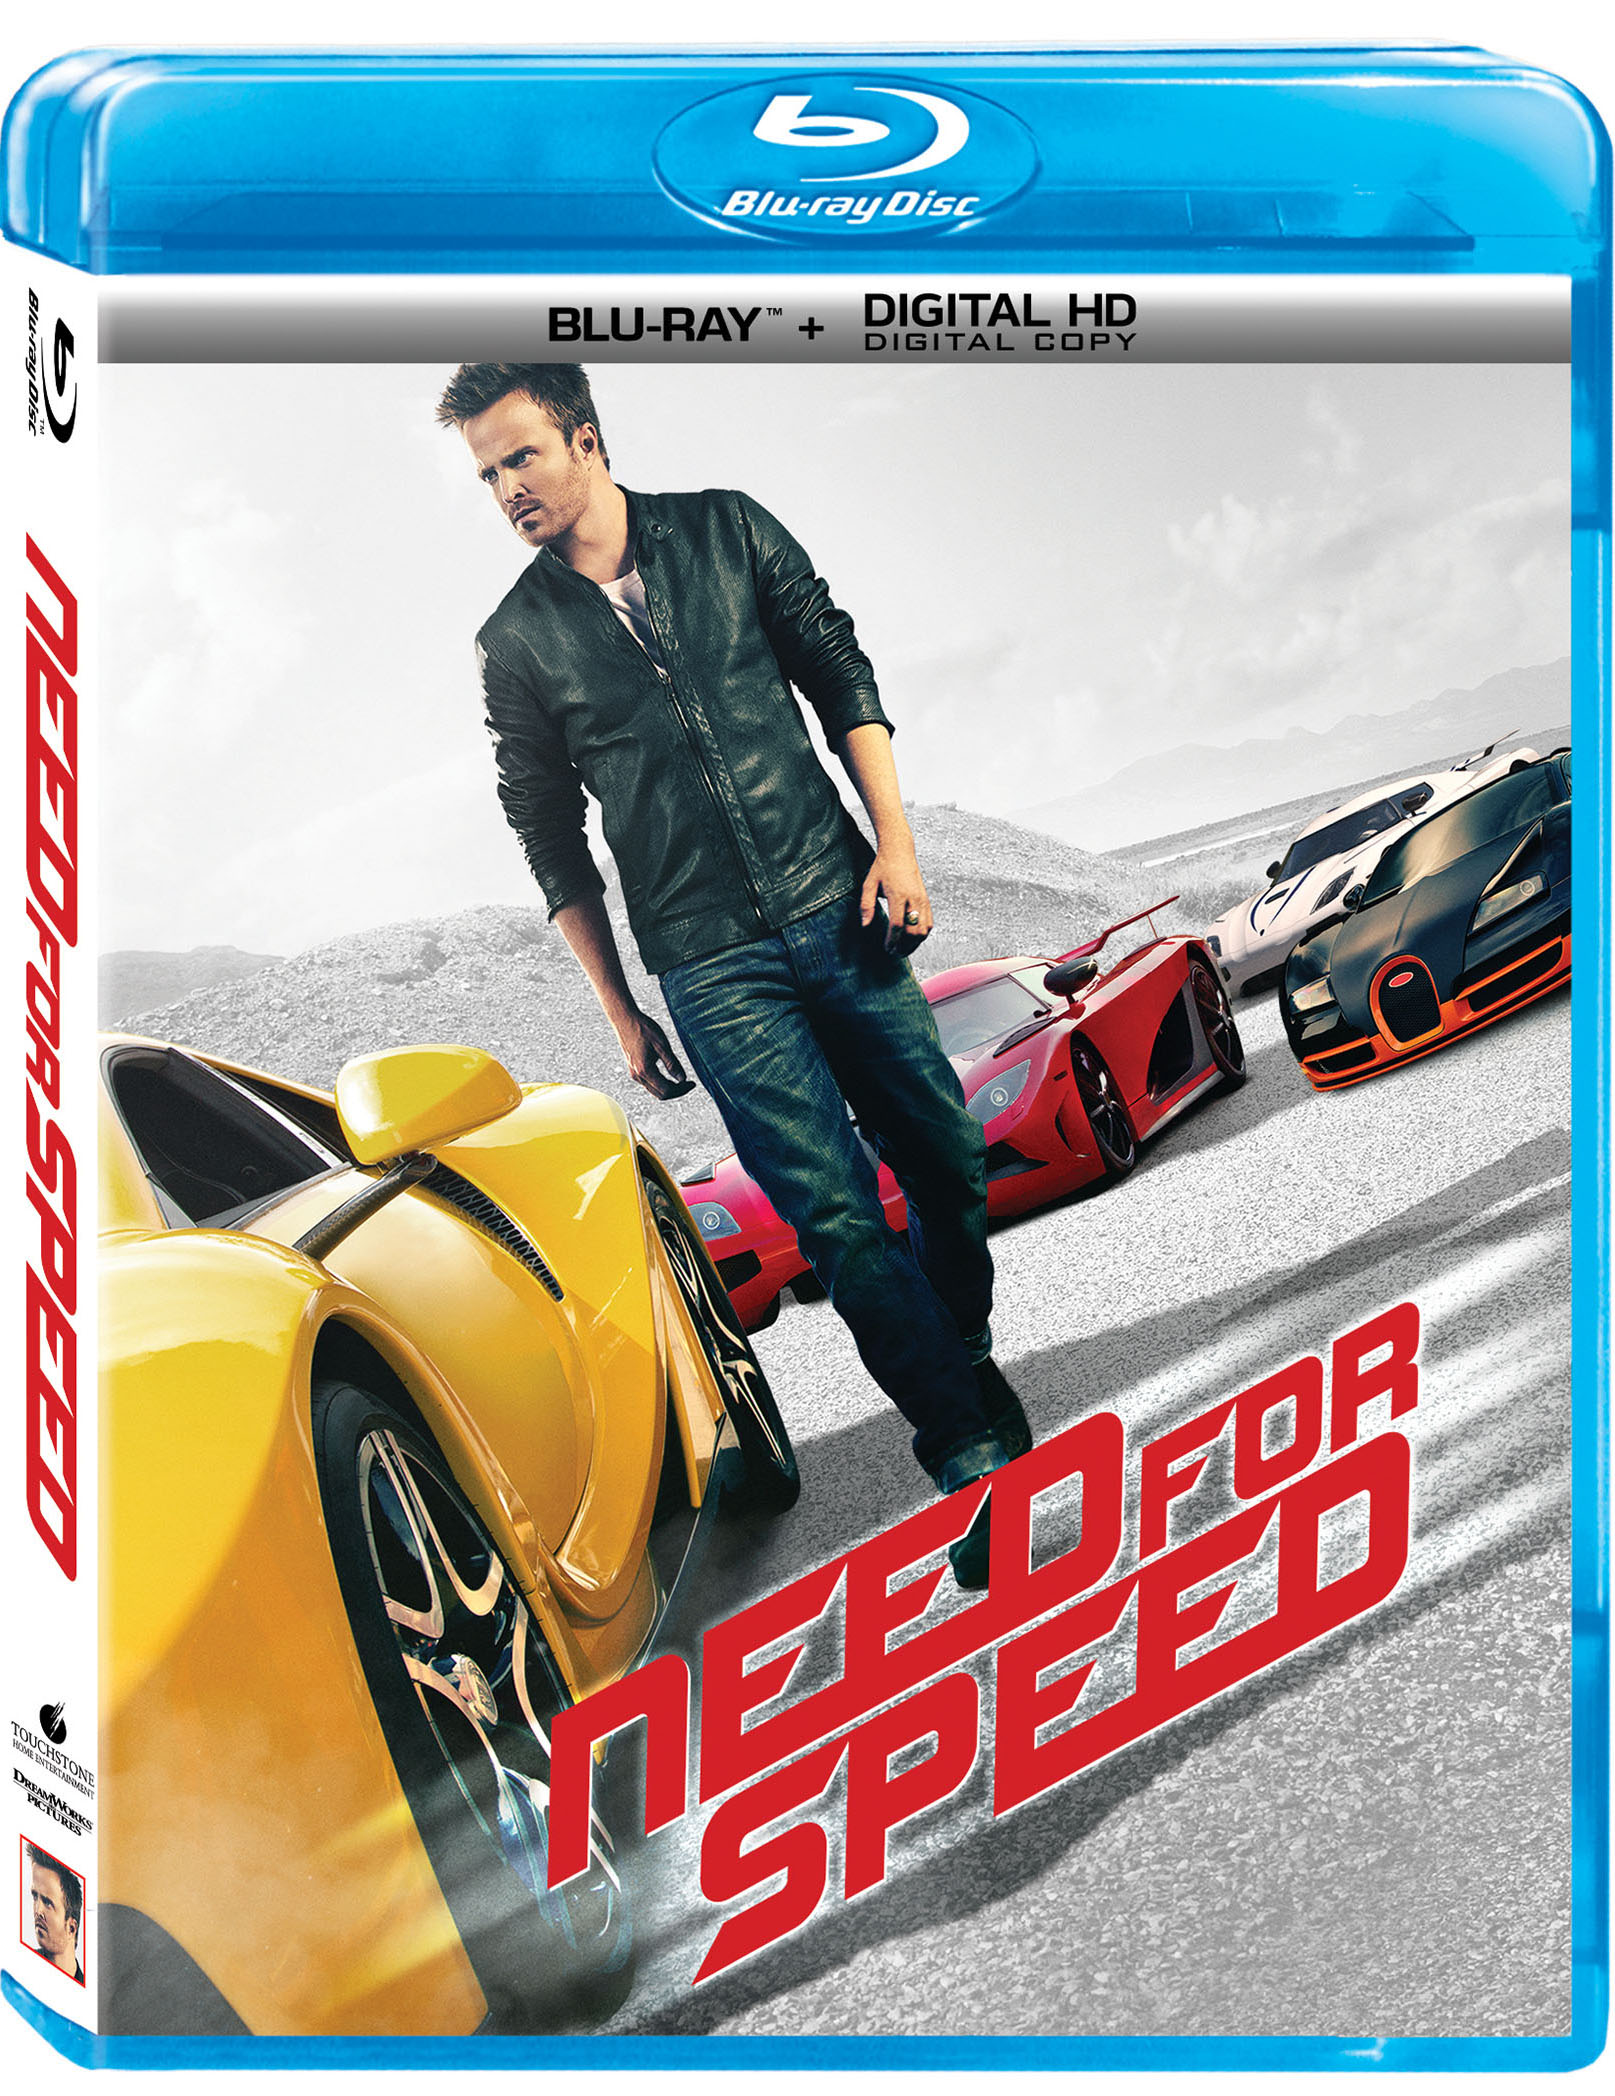 Tlcharger Need for Speed 3D BLURAY 3D SBS